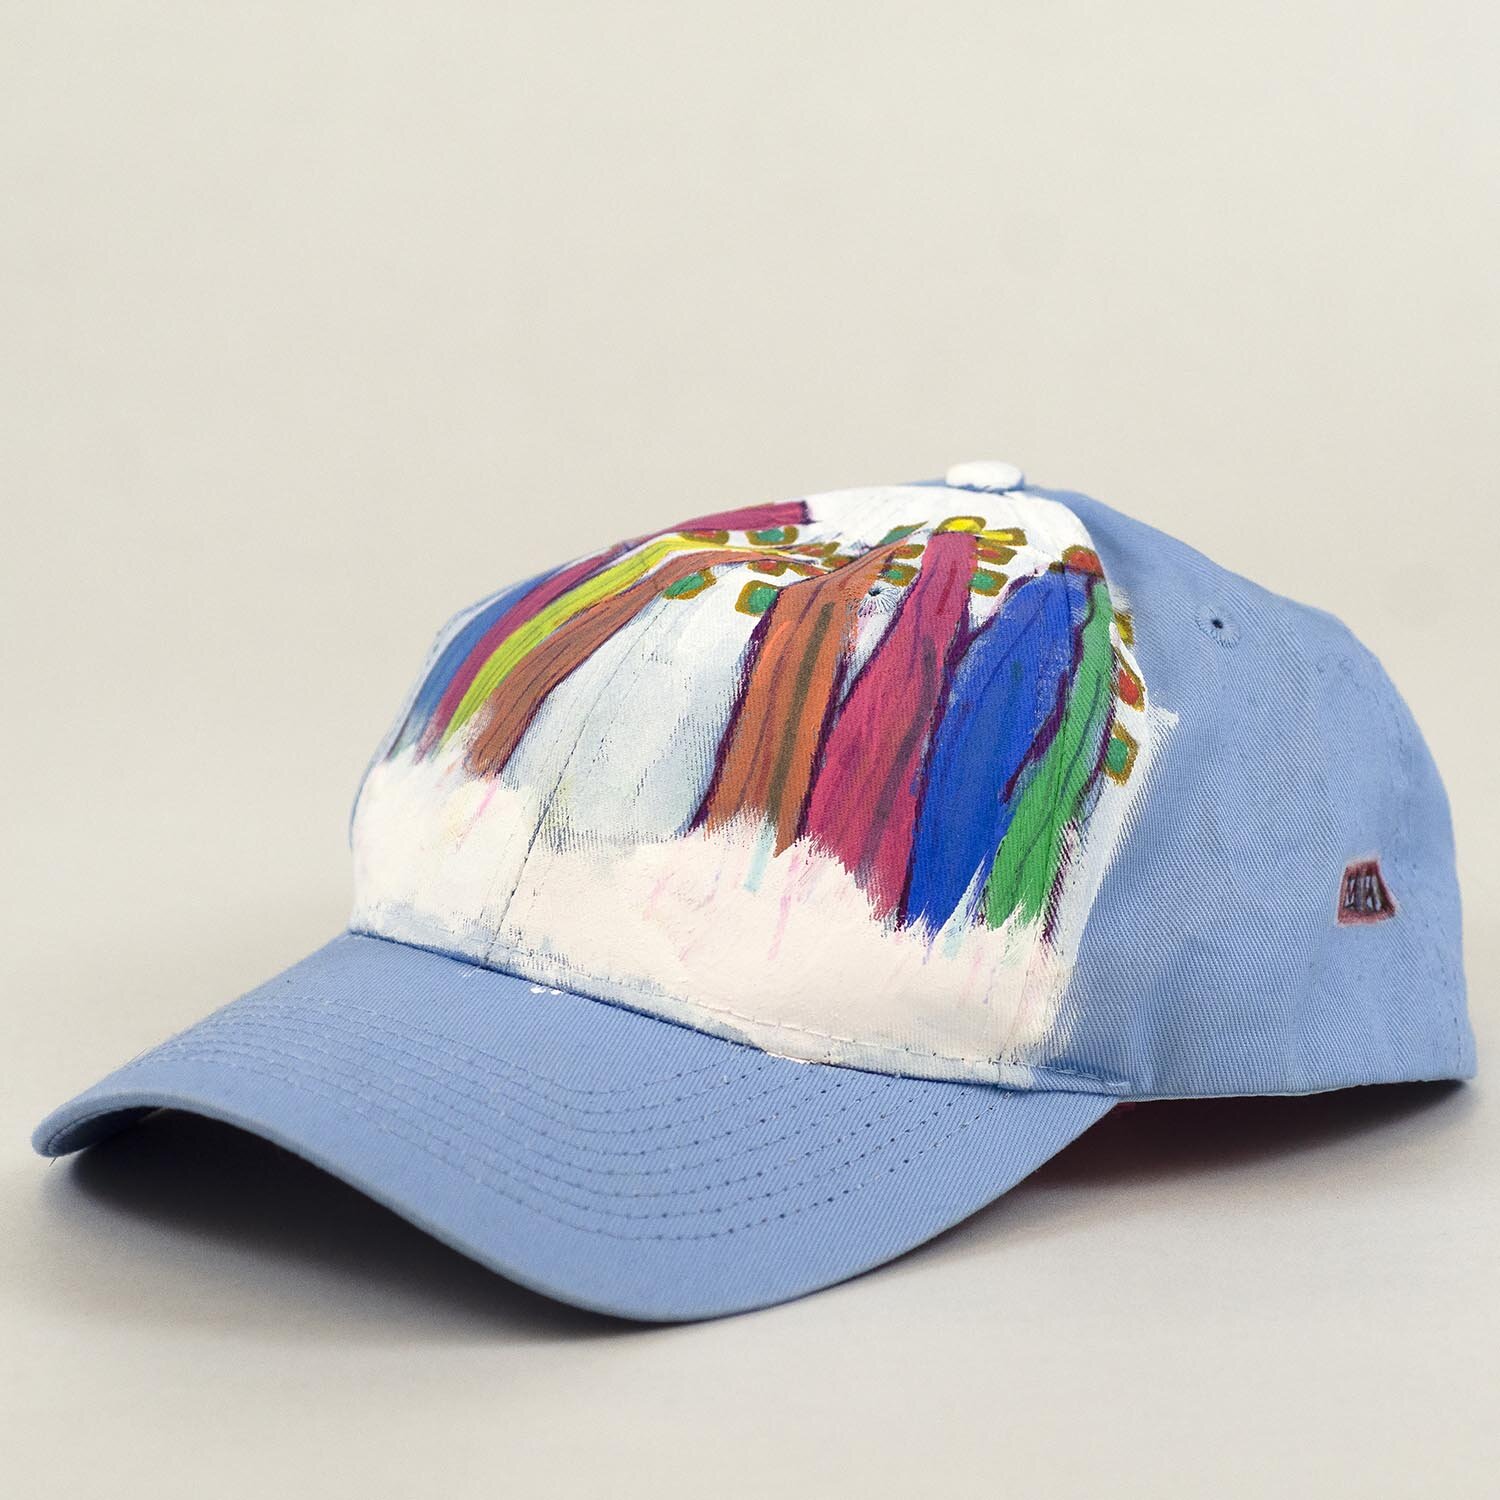 Blue Baseball Cap with hand painted Winter Trees by Mike Hinchcliff